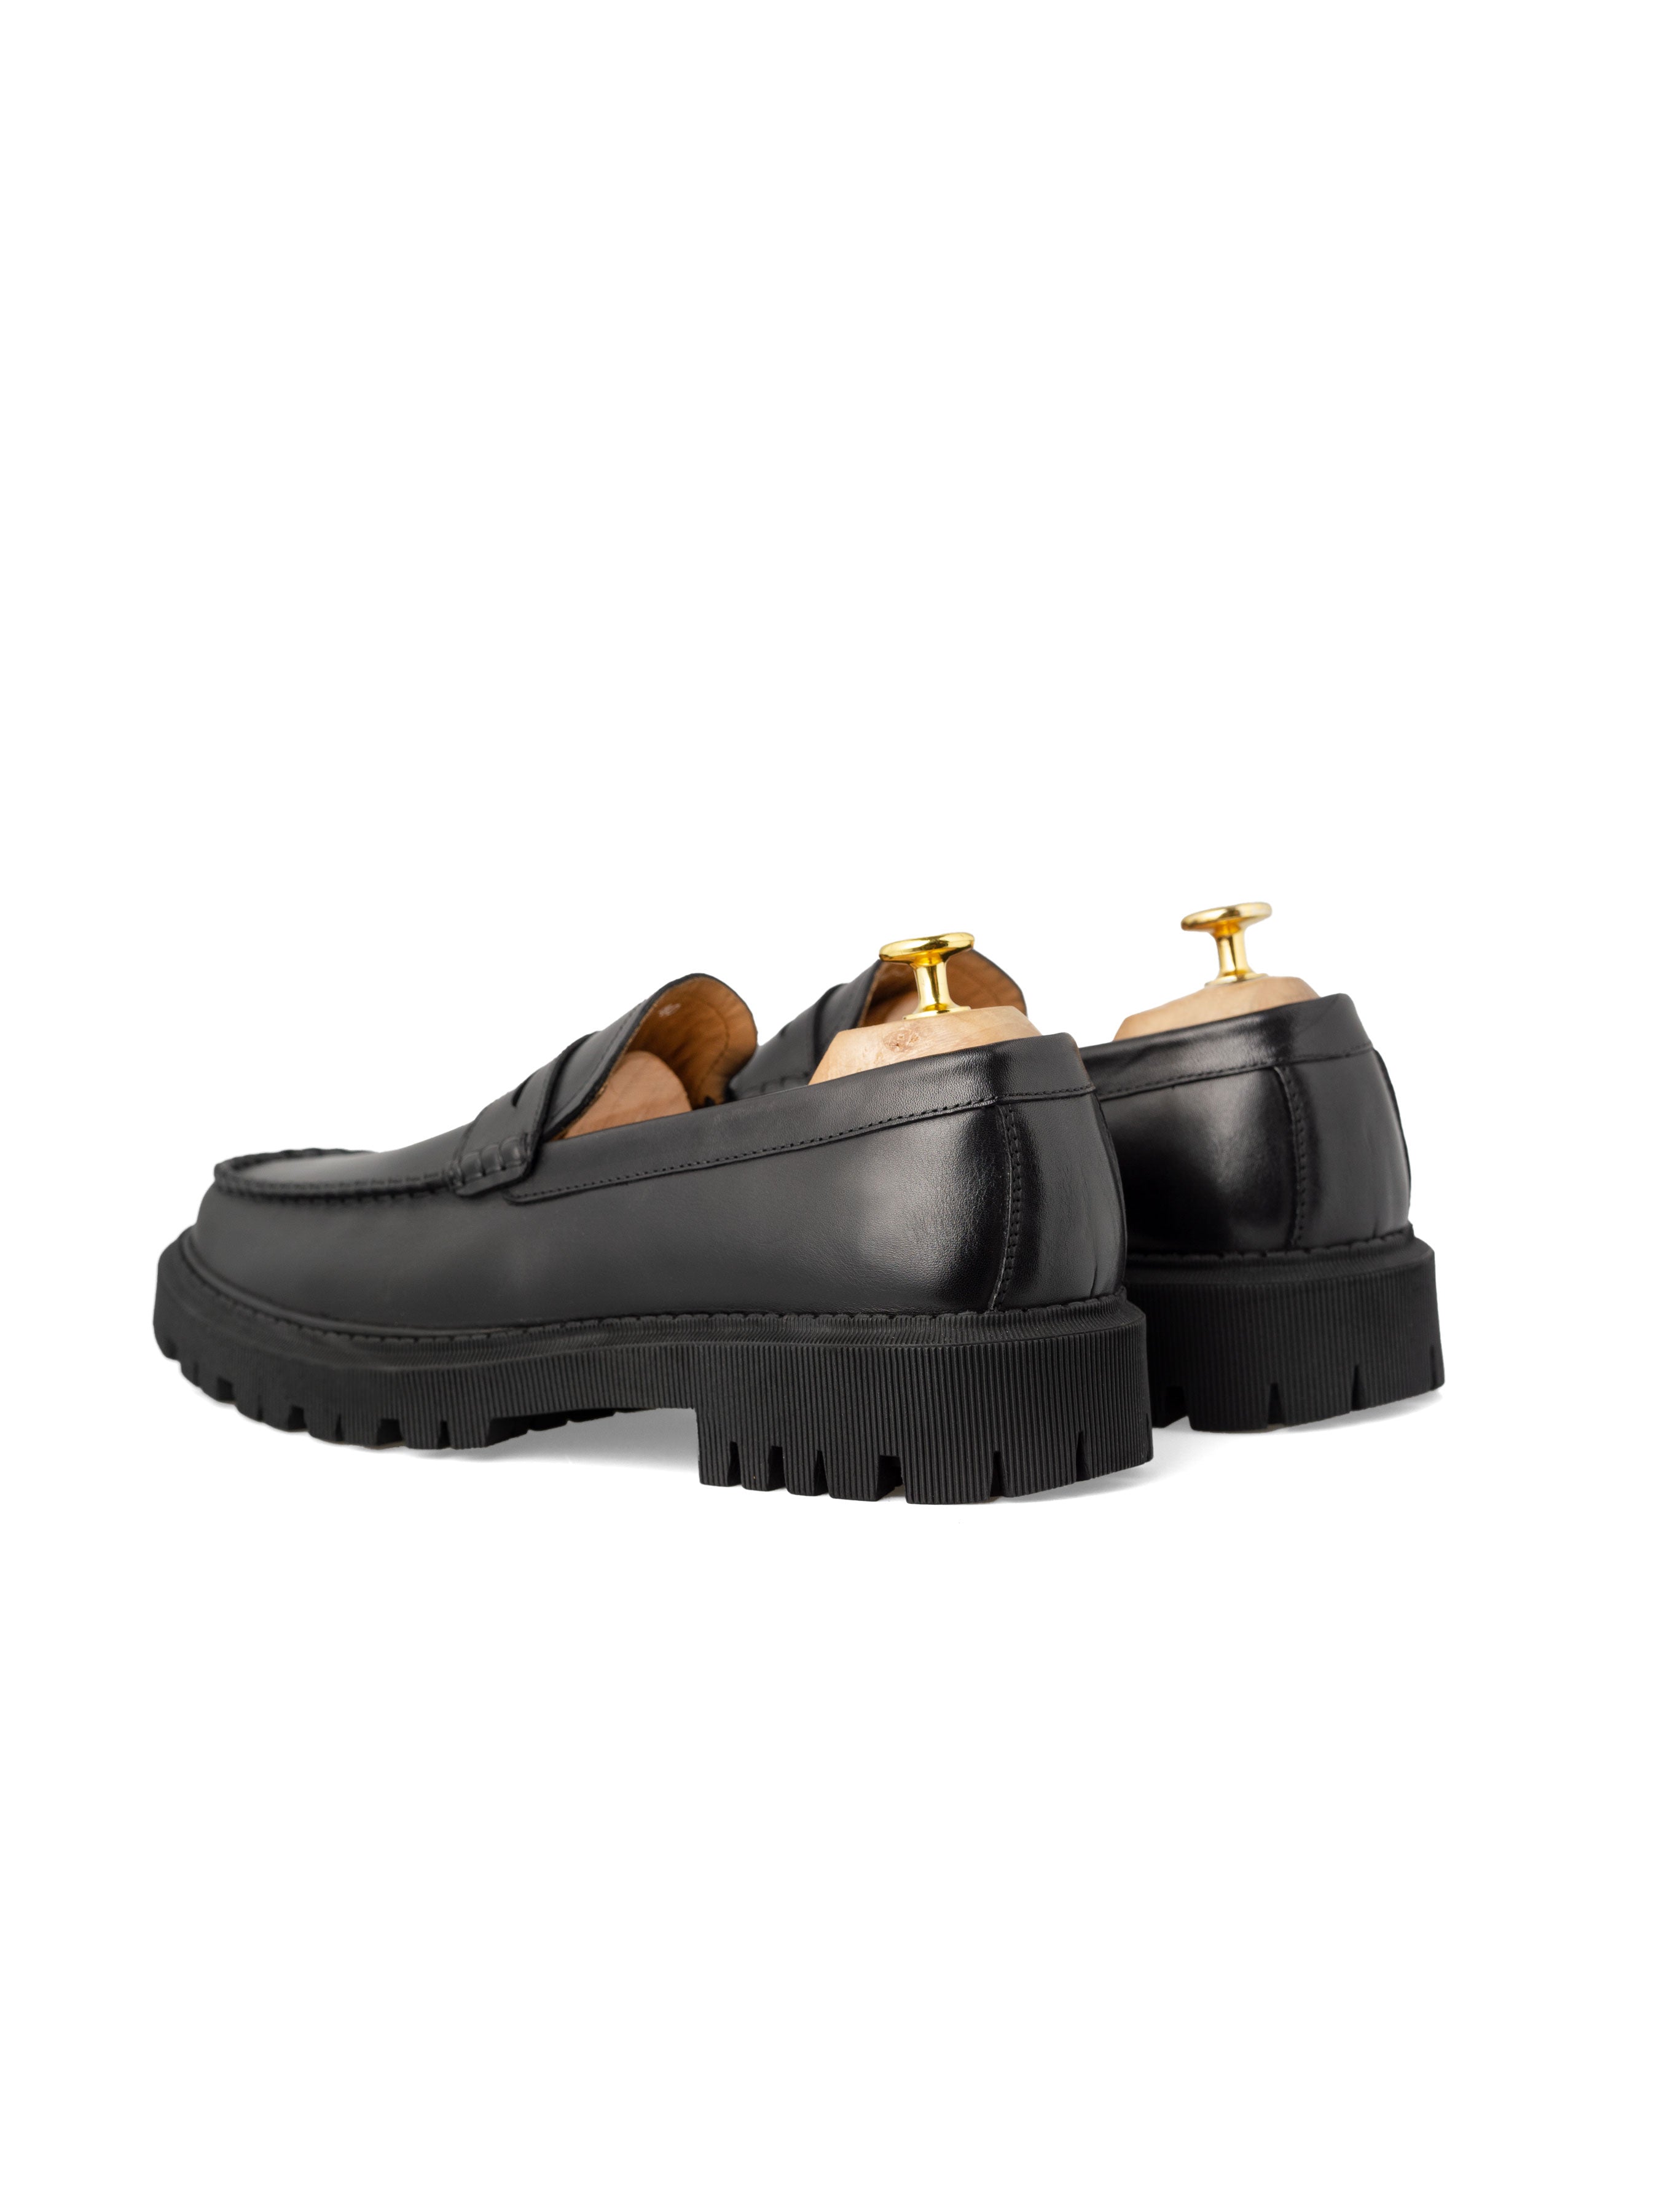 Penny Loafer - Black Polished Leather (Chunky Sole) - Zeve Shoes